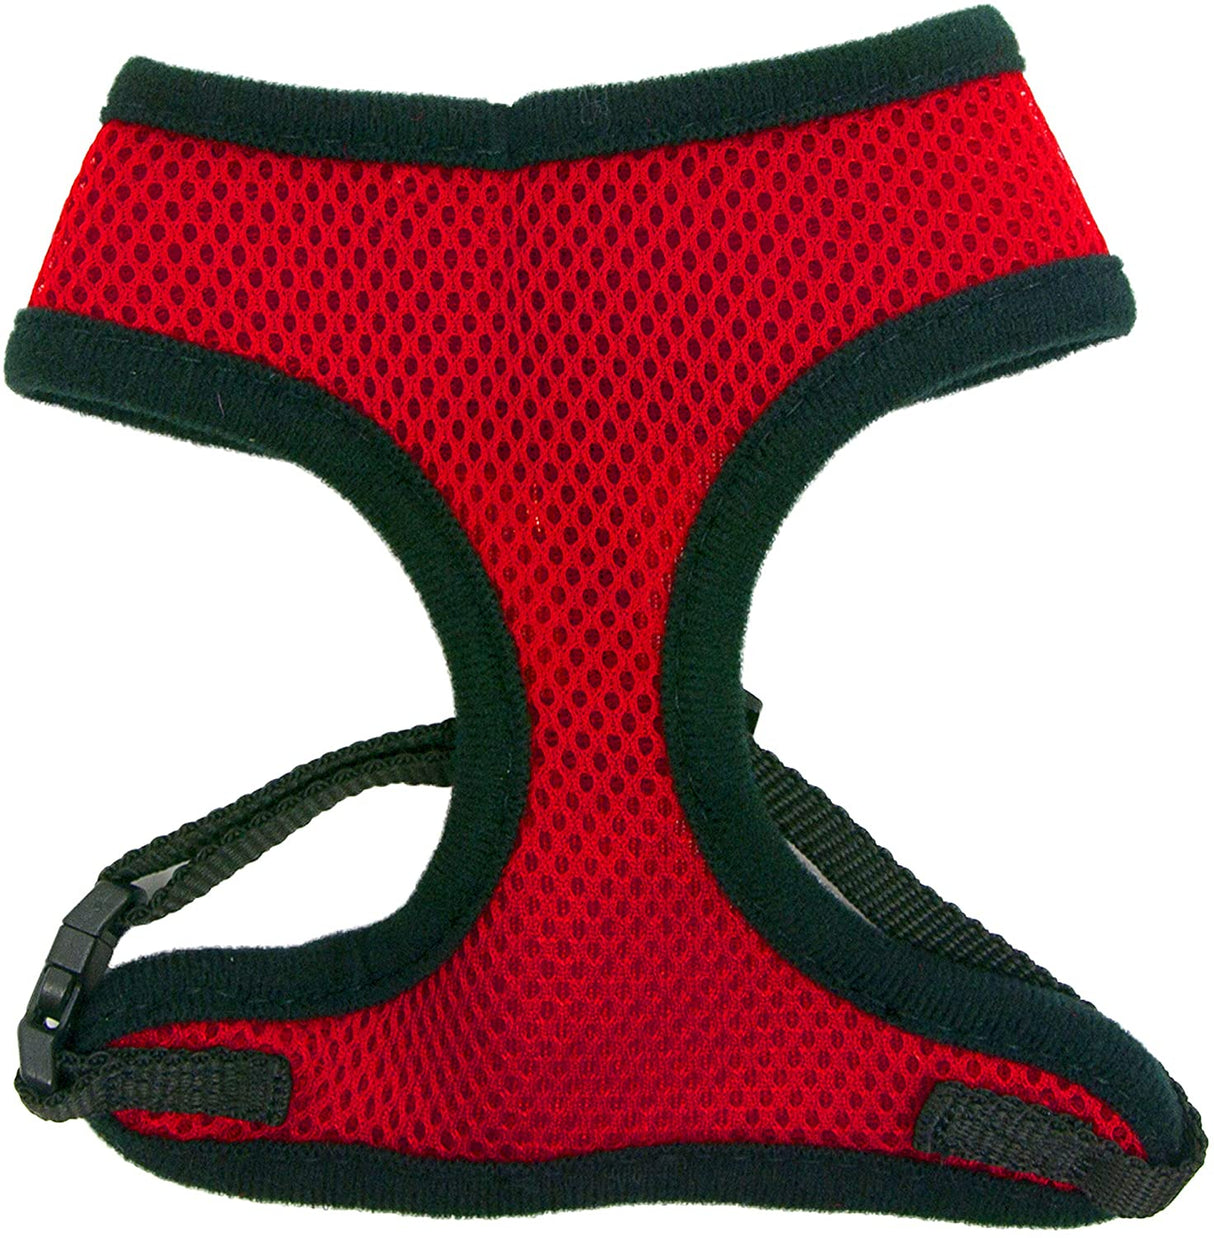 Small - 1 count Four Paws Comfort Control Harness Red